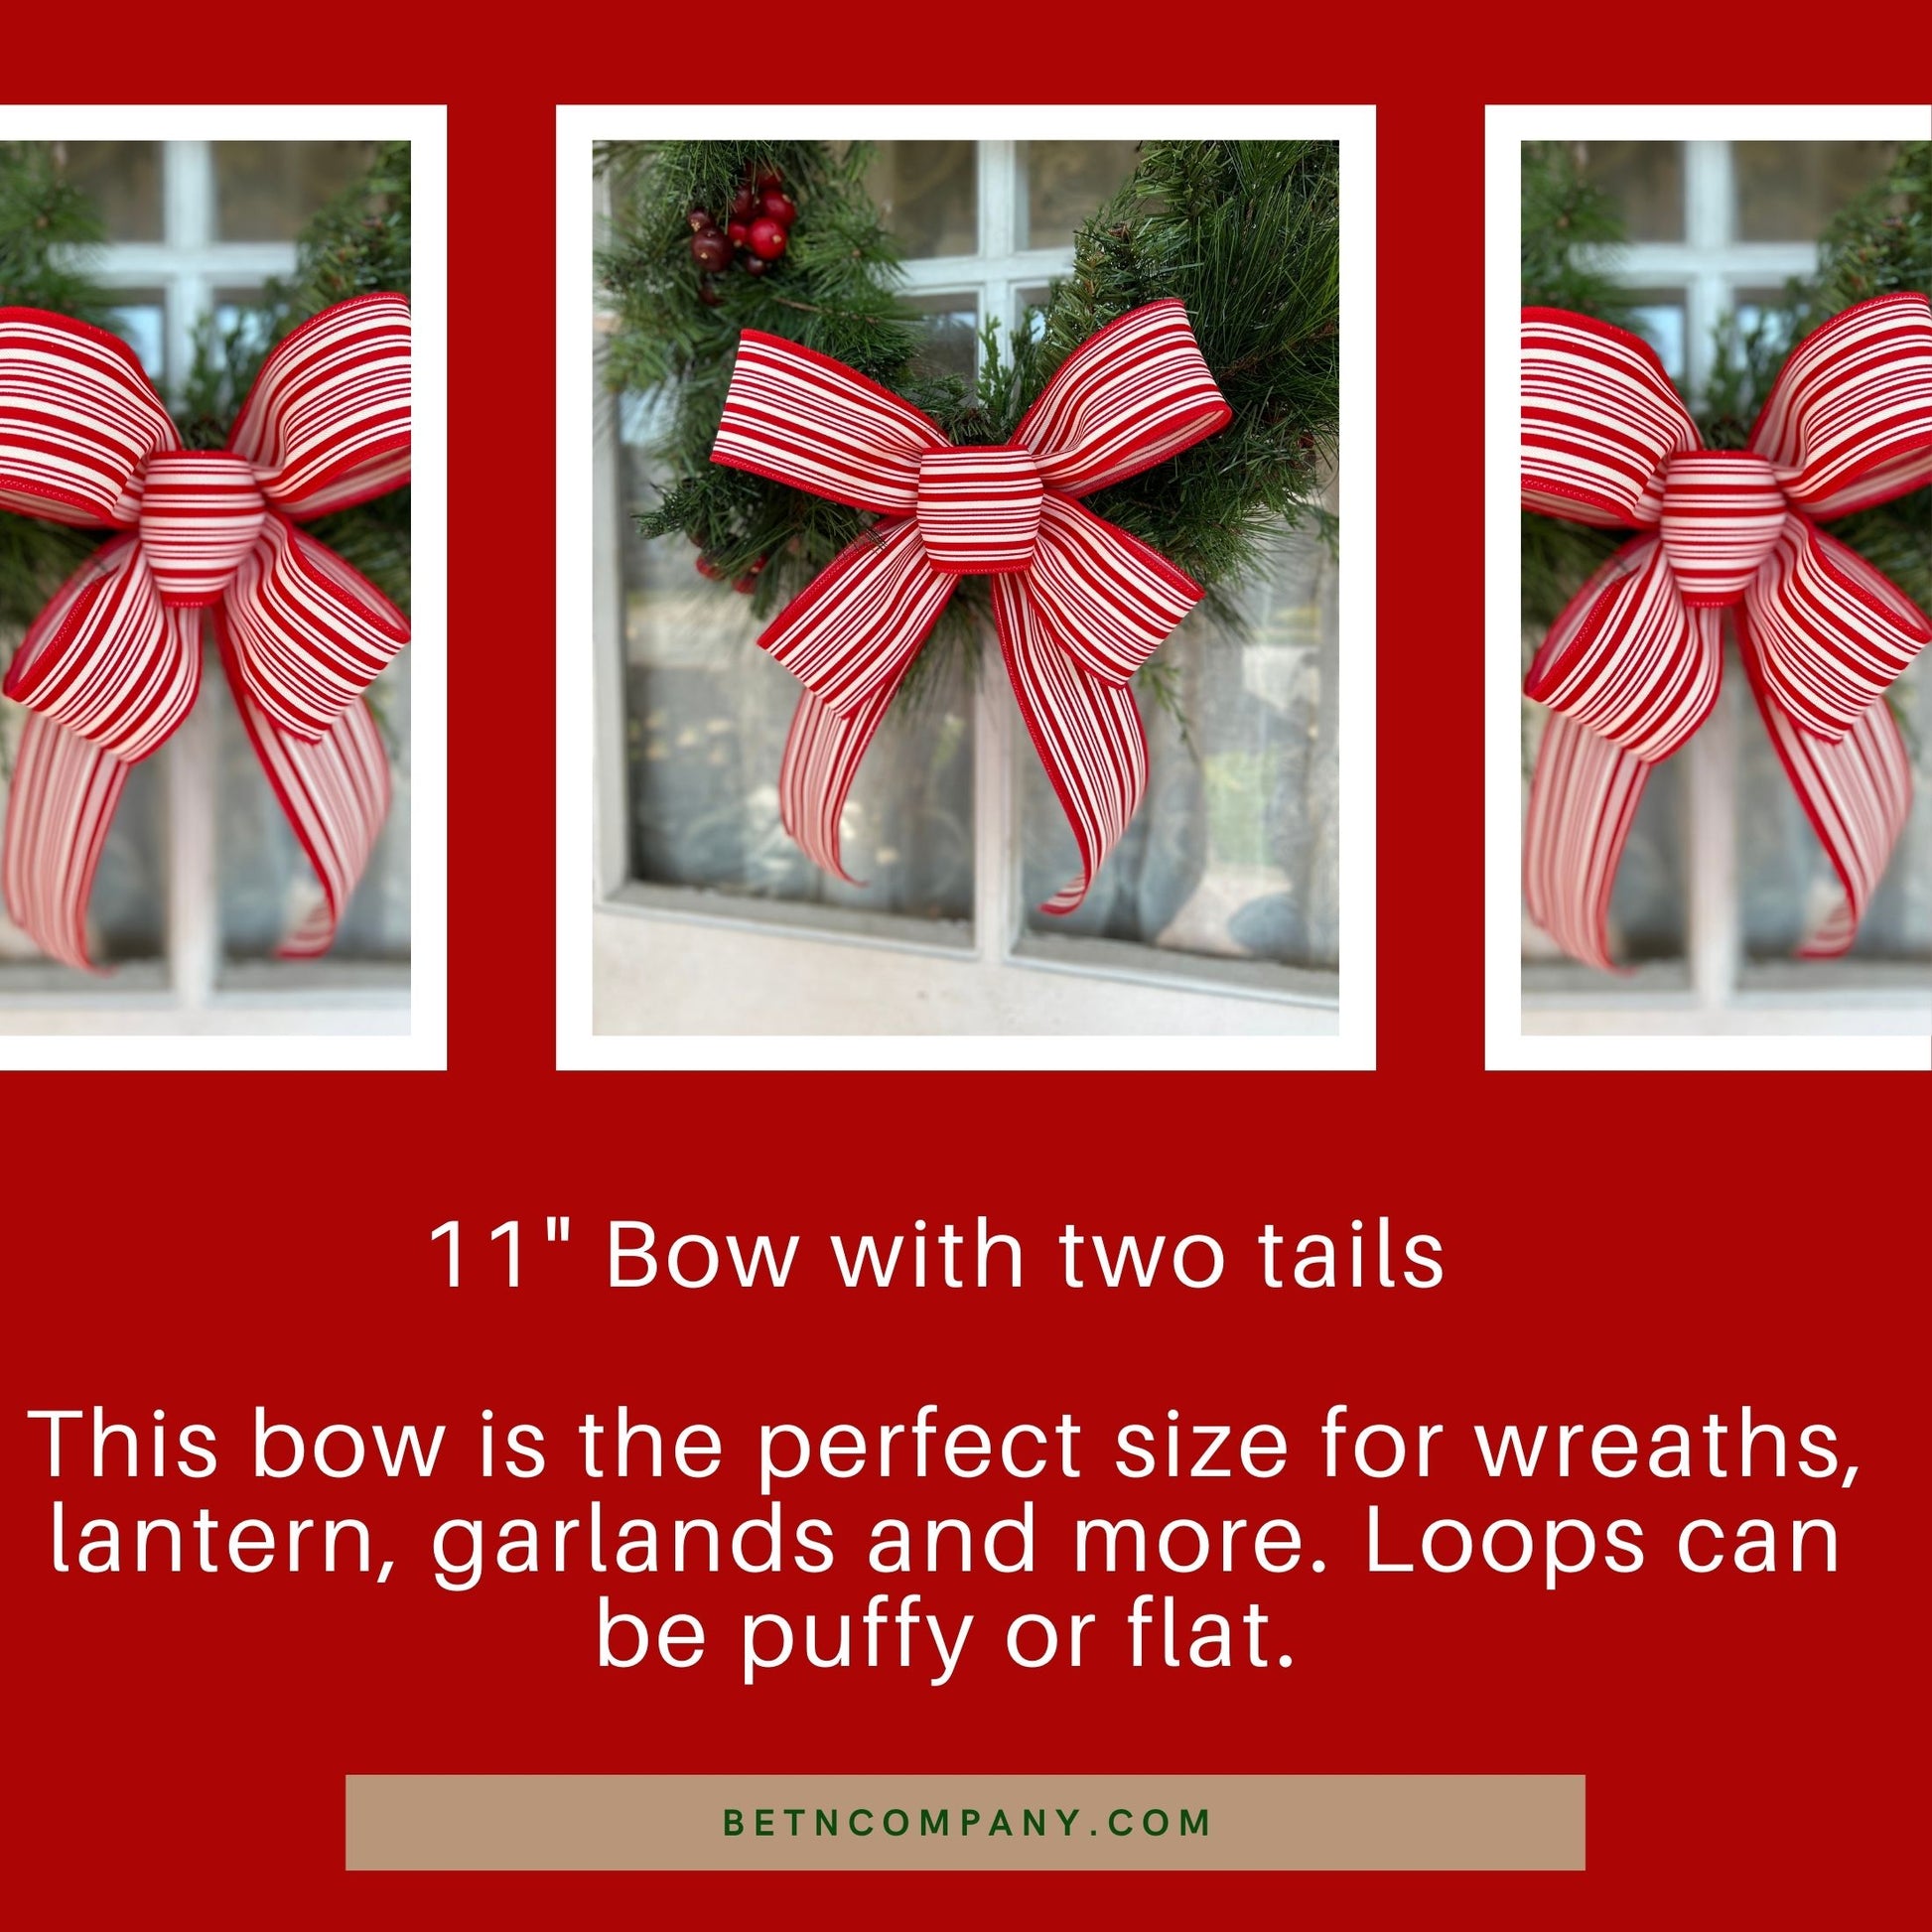 Christmas Bow / Red and White Ticking Striped Bow / Farmhouse